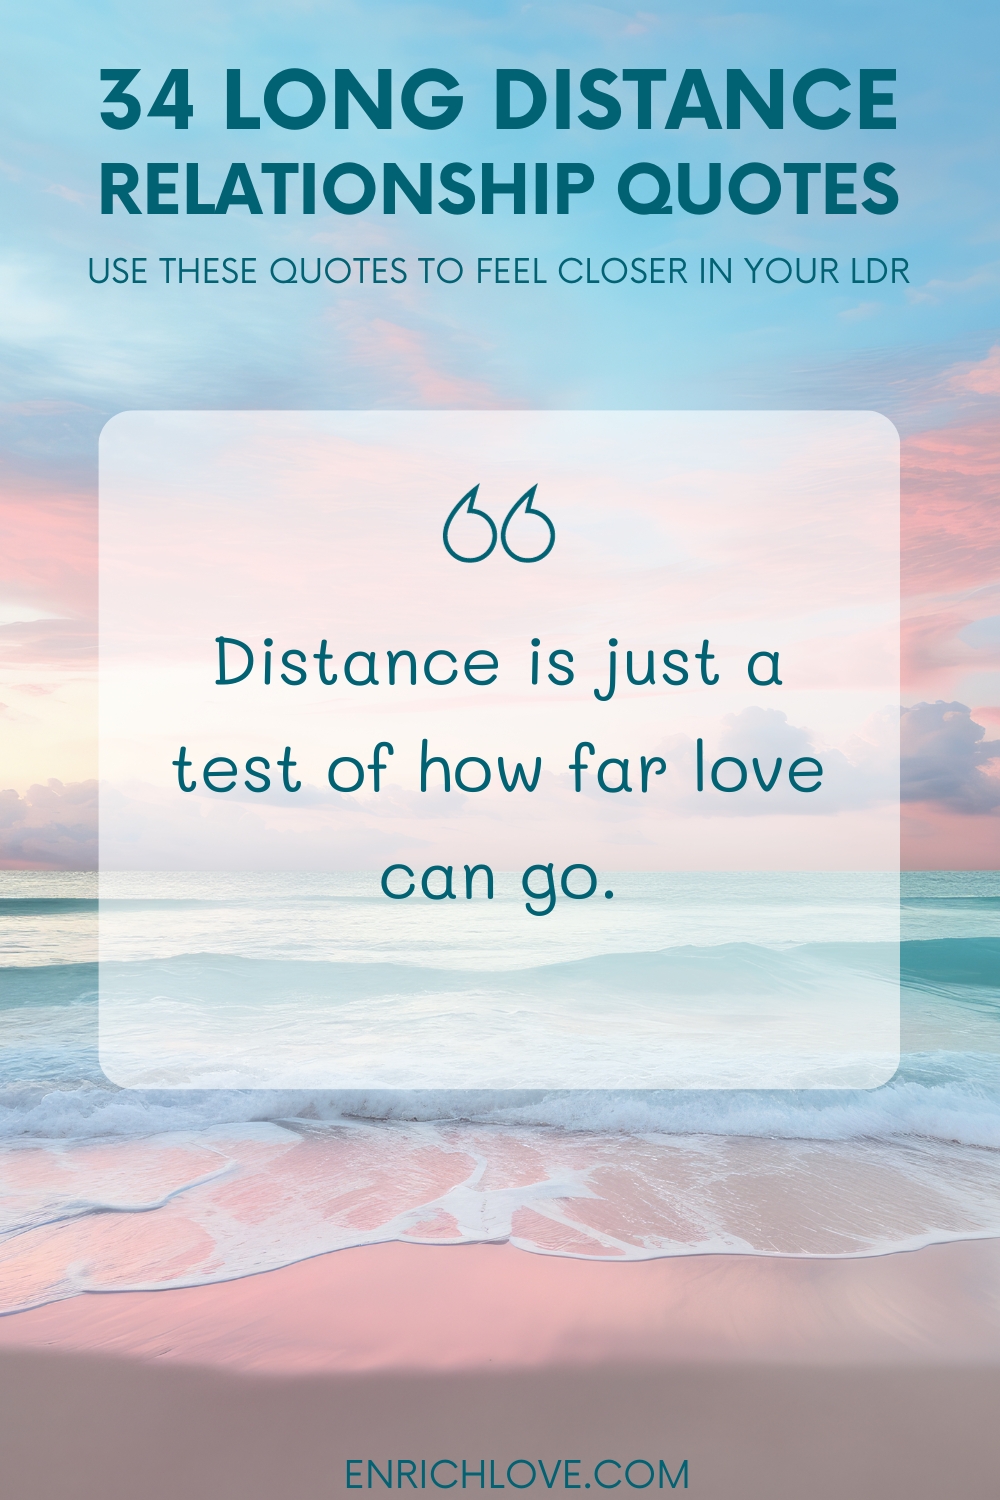 34 Long Distance Relationship Quotes - Distance is just a test of how far love can go.